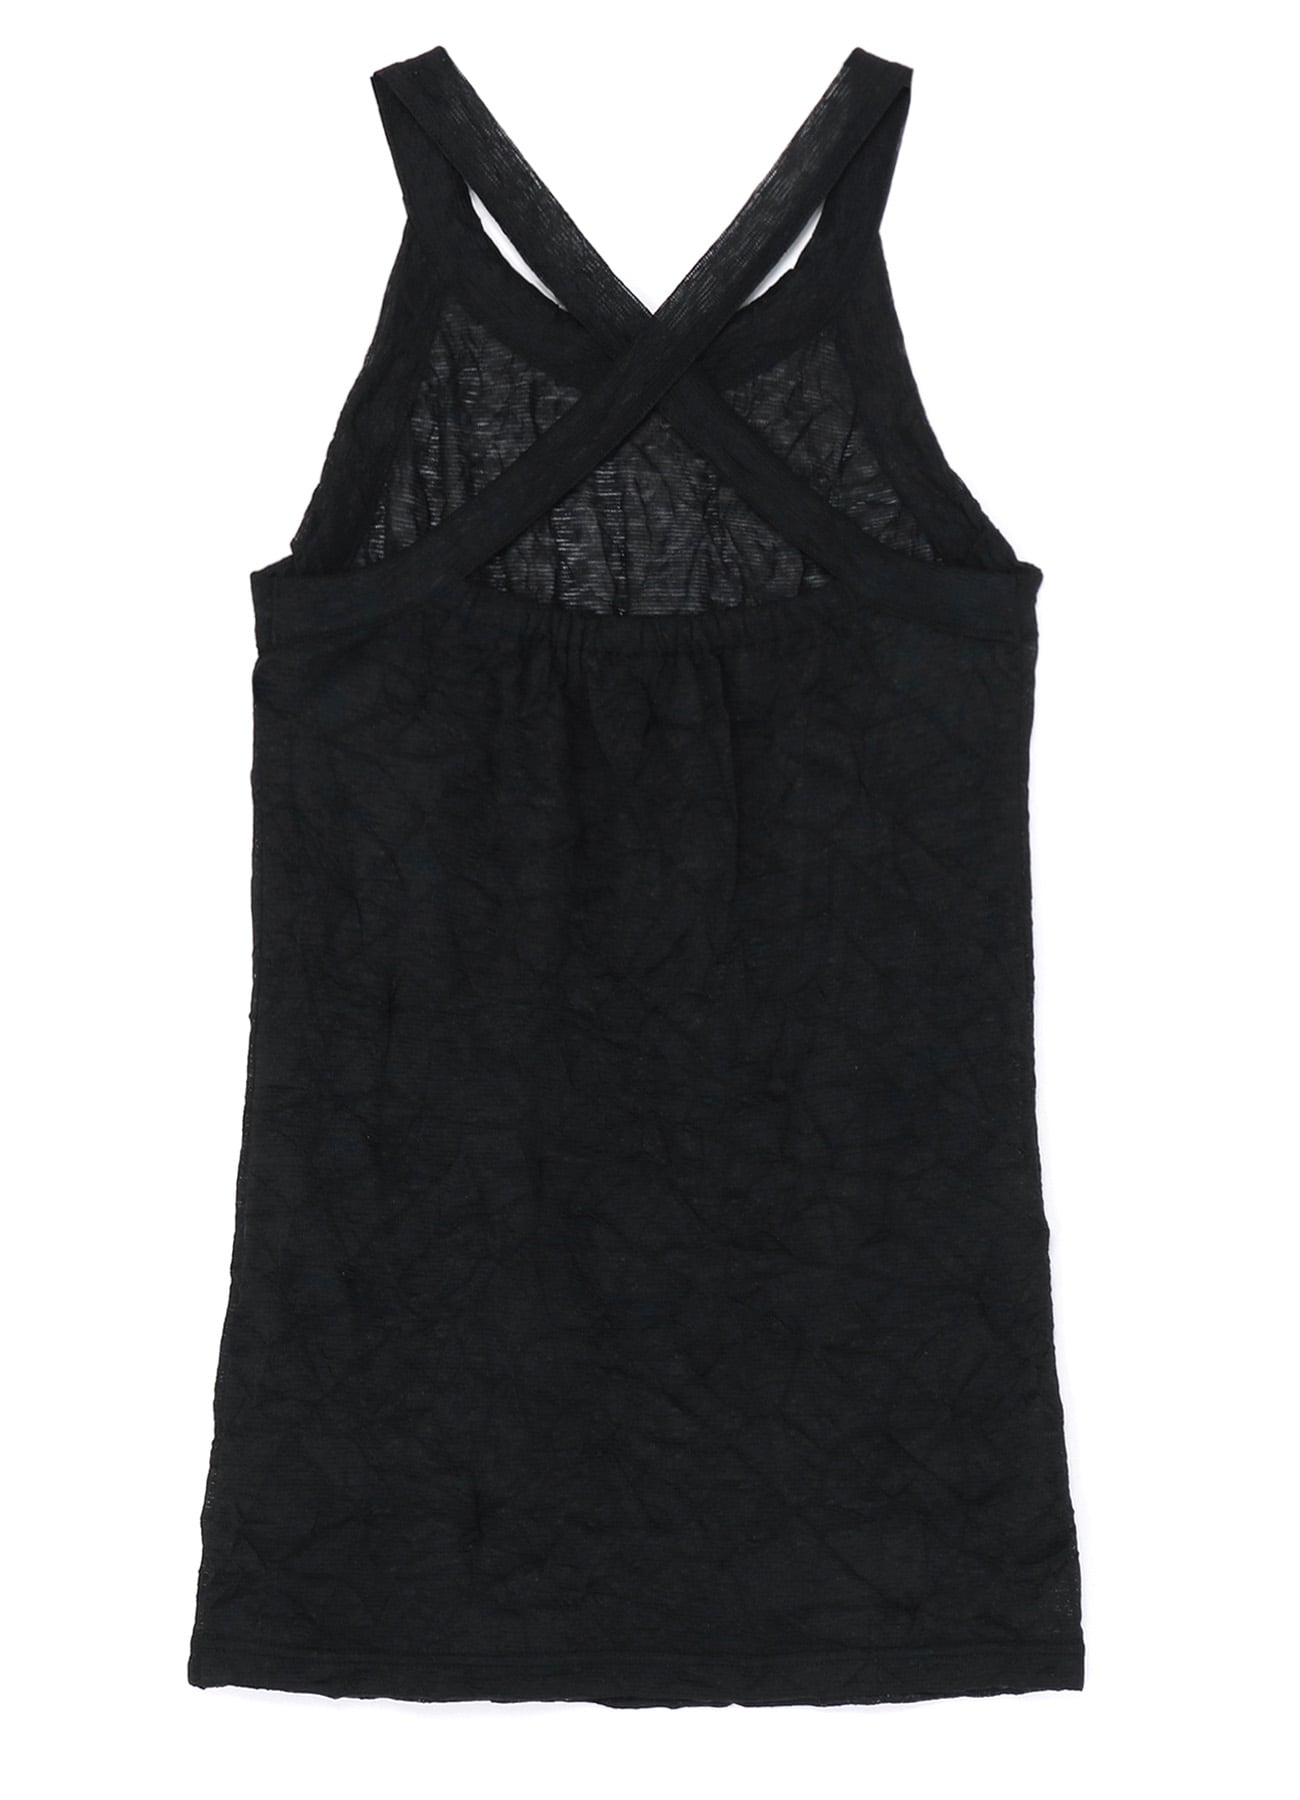 WRINKLED LINEN/POLYESTER PLAIN STITCH CAMISOLE